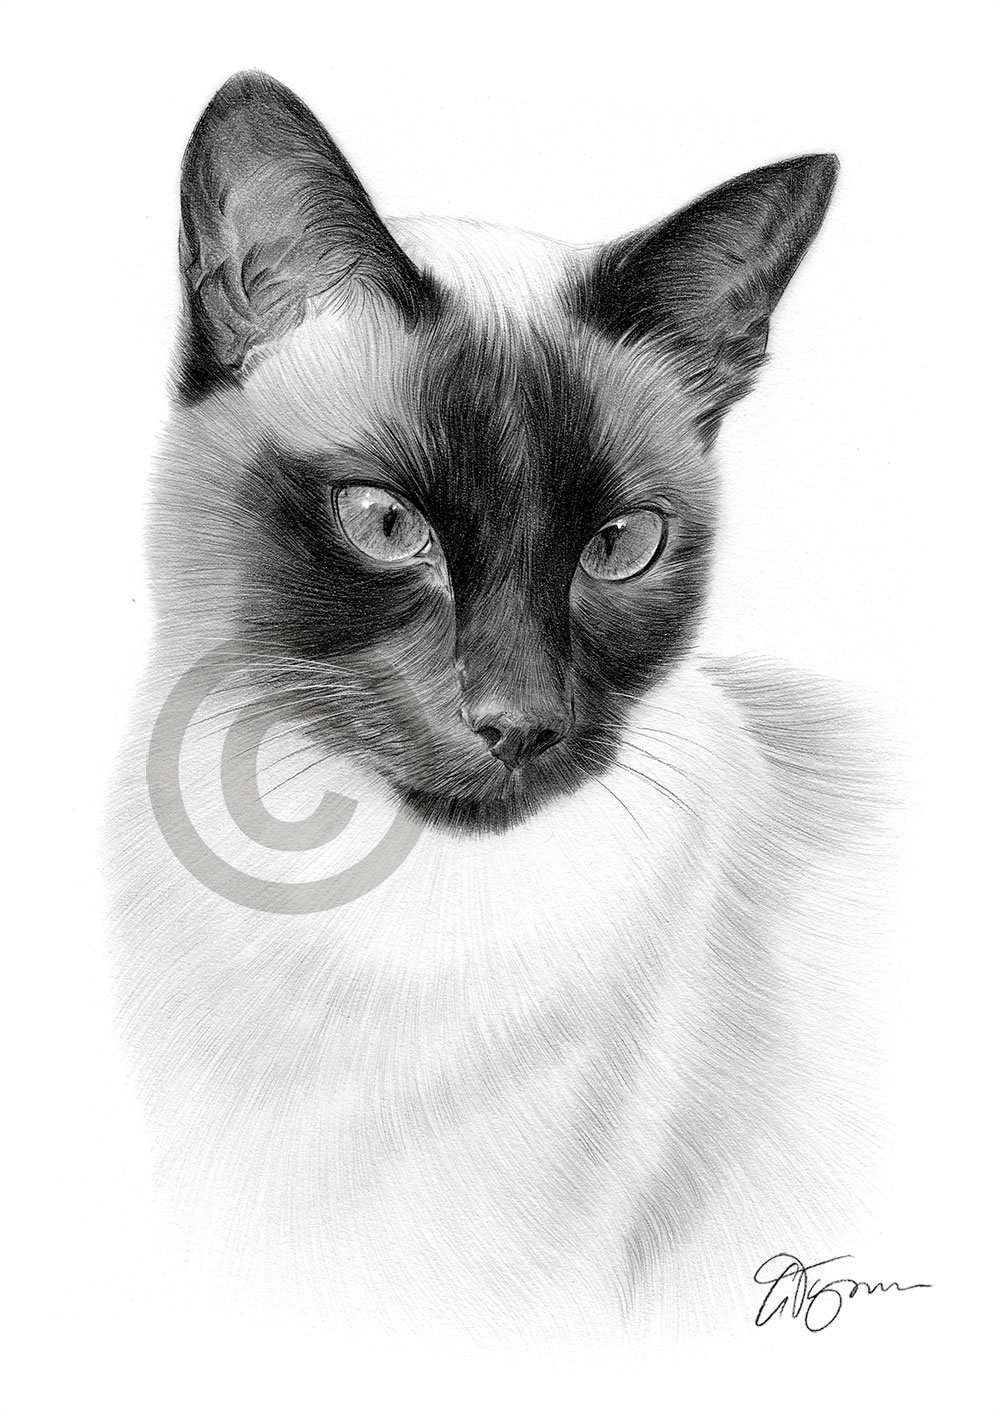 Pencil drawing of a siamese cat by artist Gary Tymon